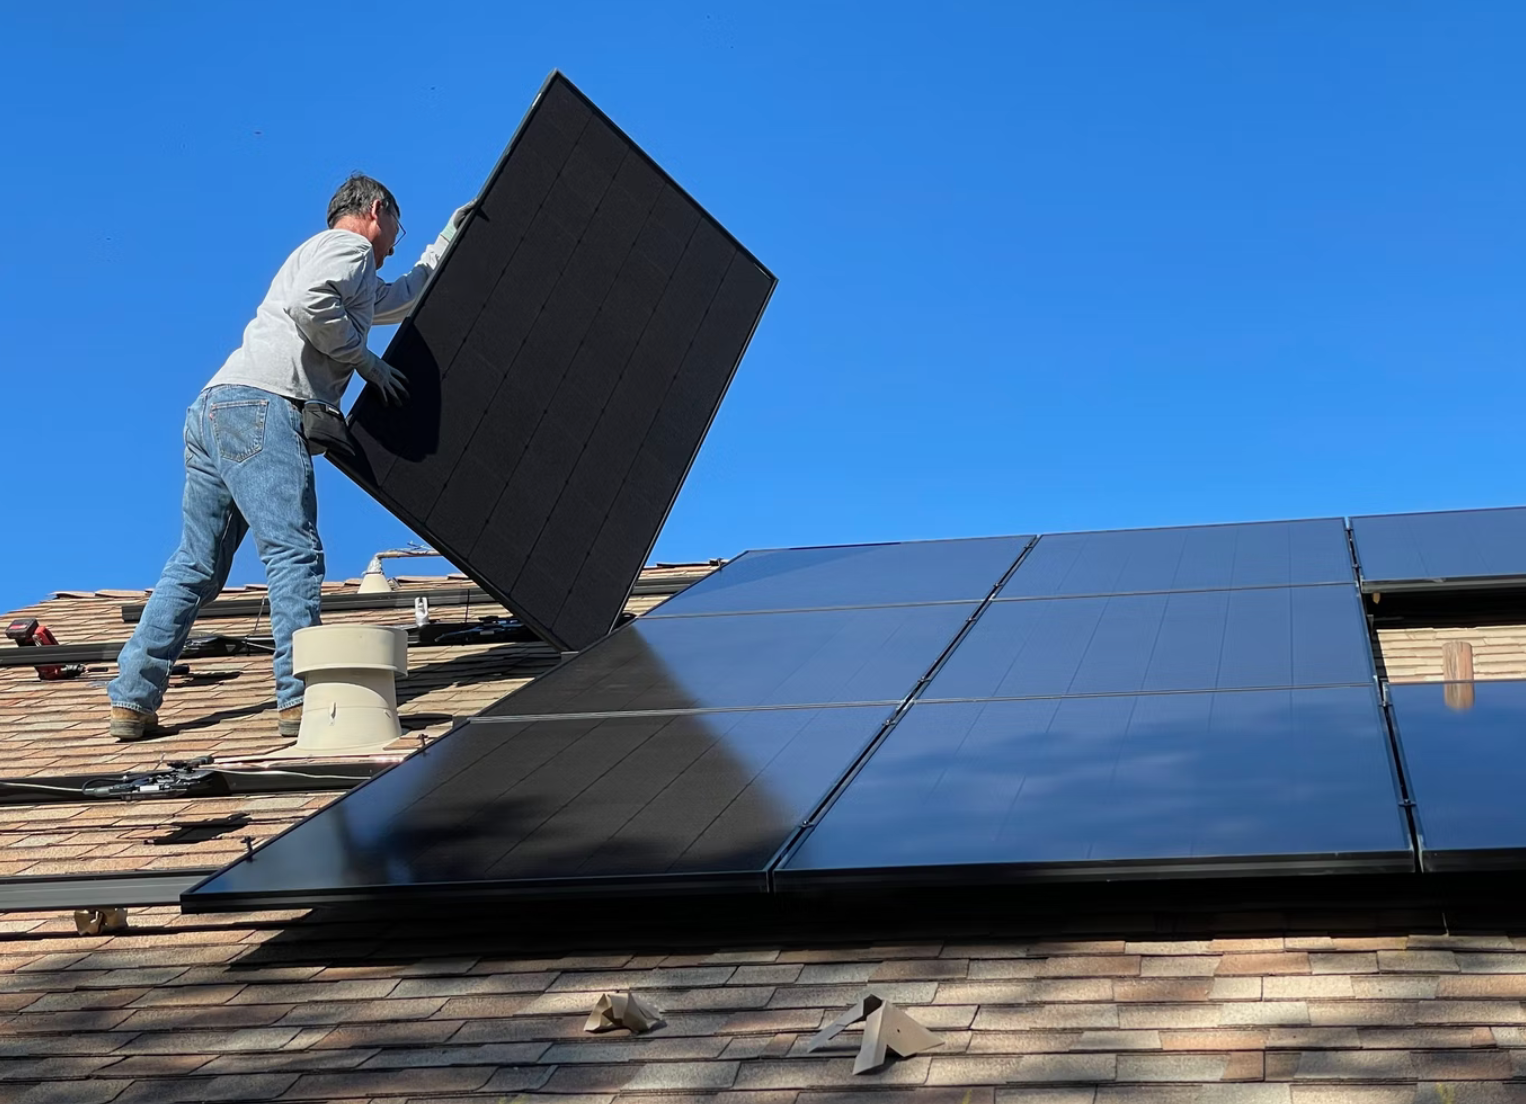 SinglePoint Reports That Its Growth-By-Acquisition Strategy Is Helping More Homeowners Switch To Solar